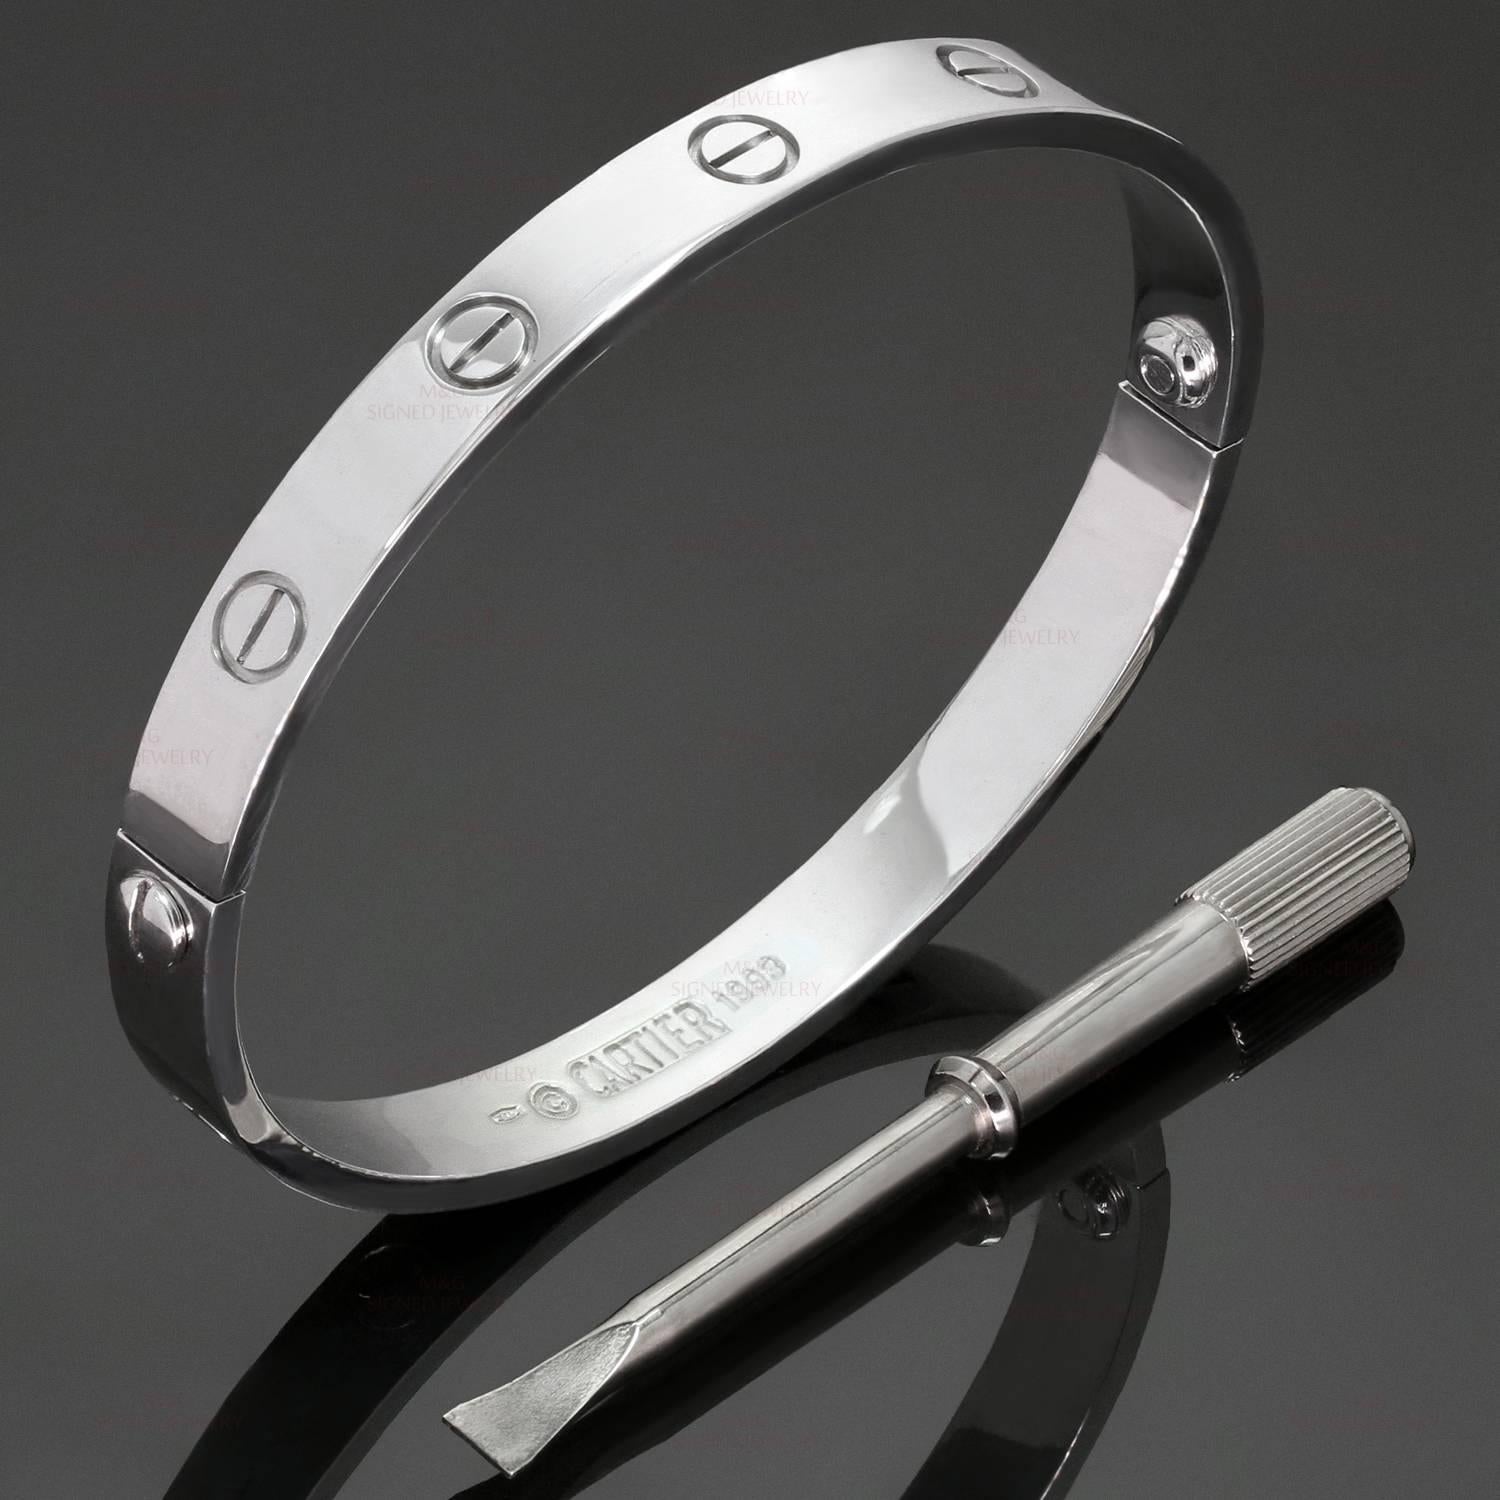 This iconic and timeless bracelet from Cartier's Love collection is crafted in 18k white gold and completed with the original Cartier screwdriver. This bangle is a size 17. Made in France circa 1993. Excellent condition. Comes in Cartier pouch.